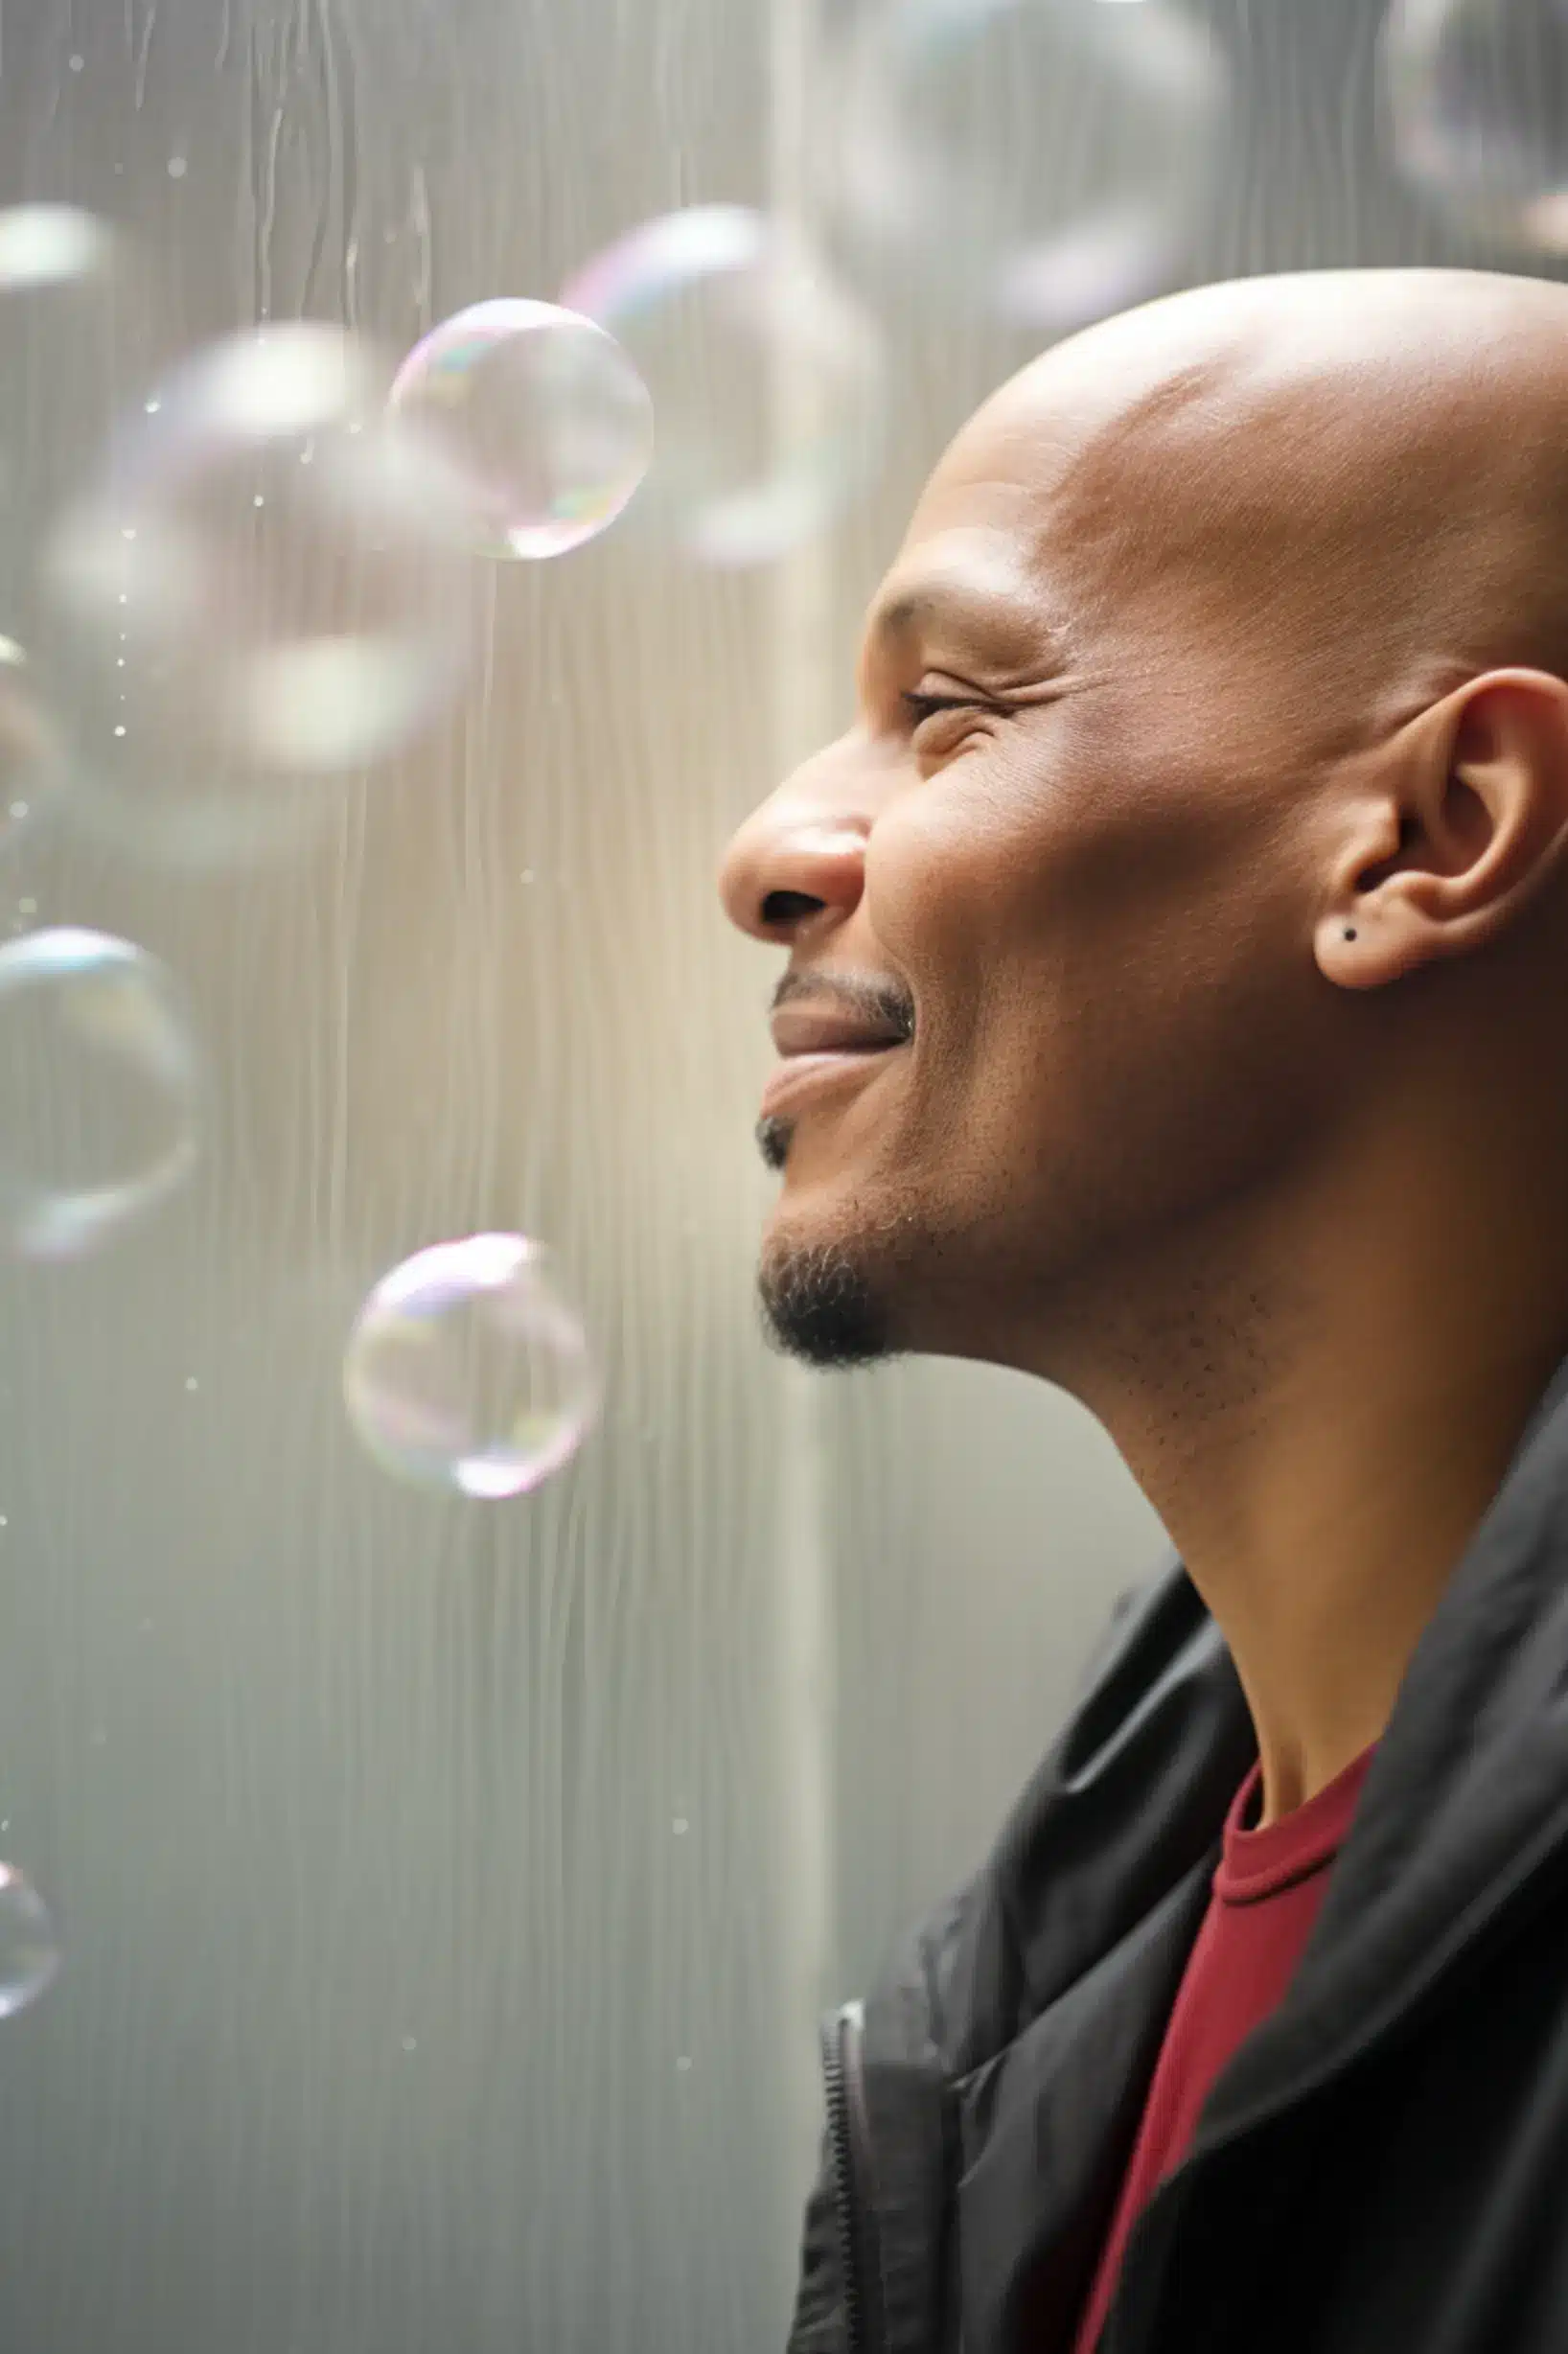 bald man smiling with bubbles around him